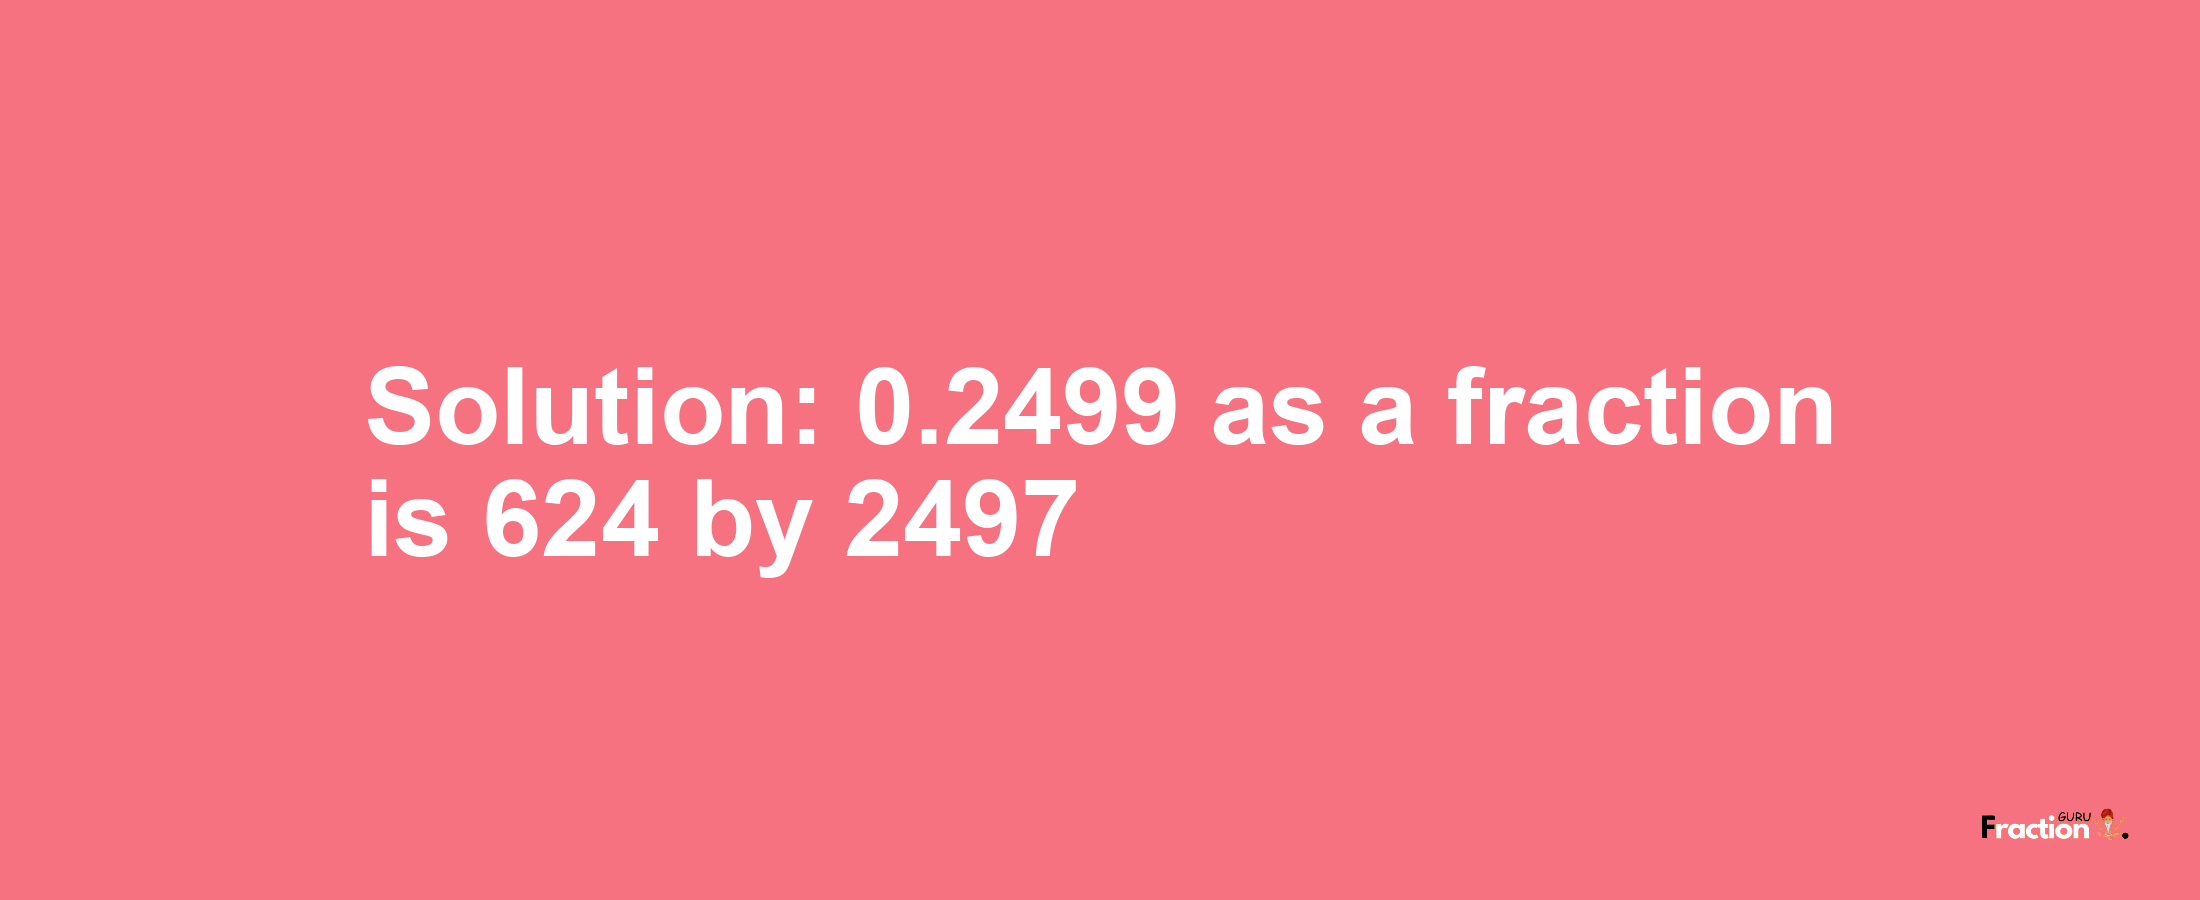 Solution:0.2499 as a fraction is 624/2497